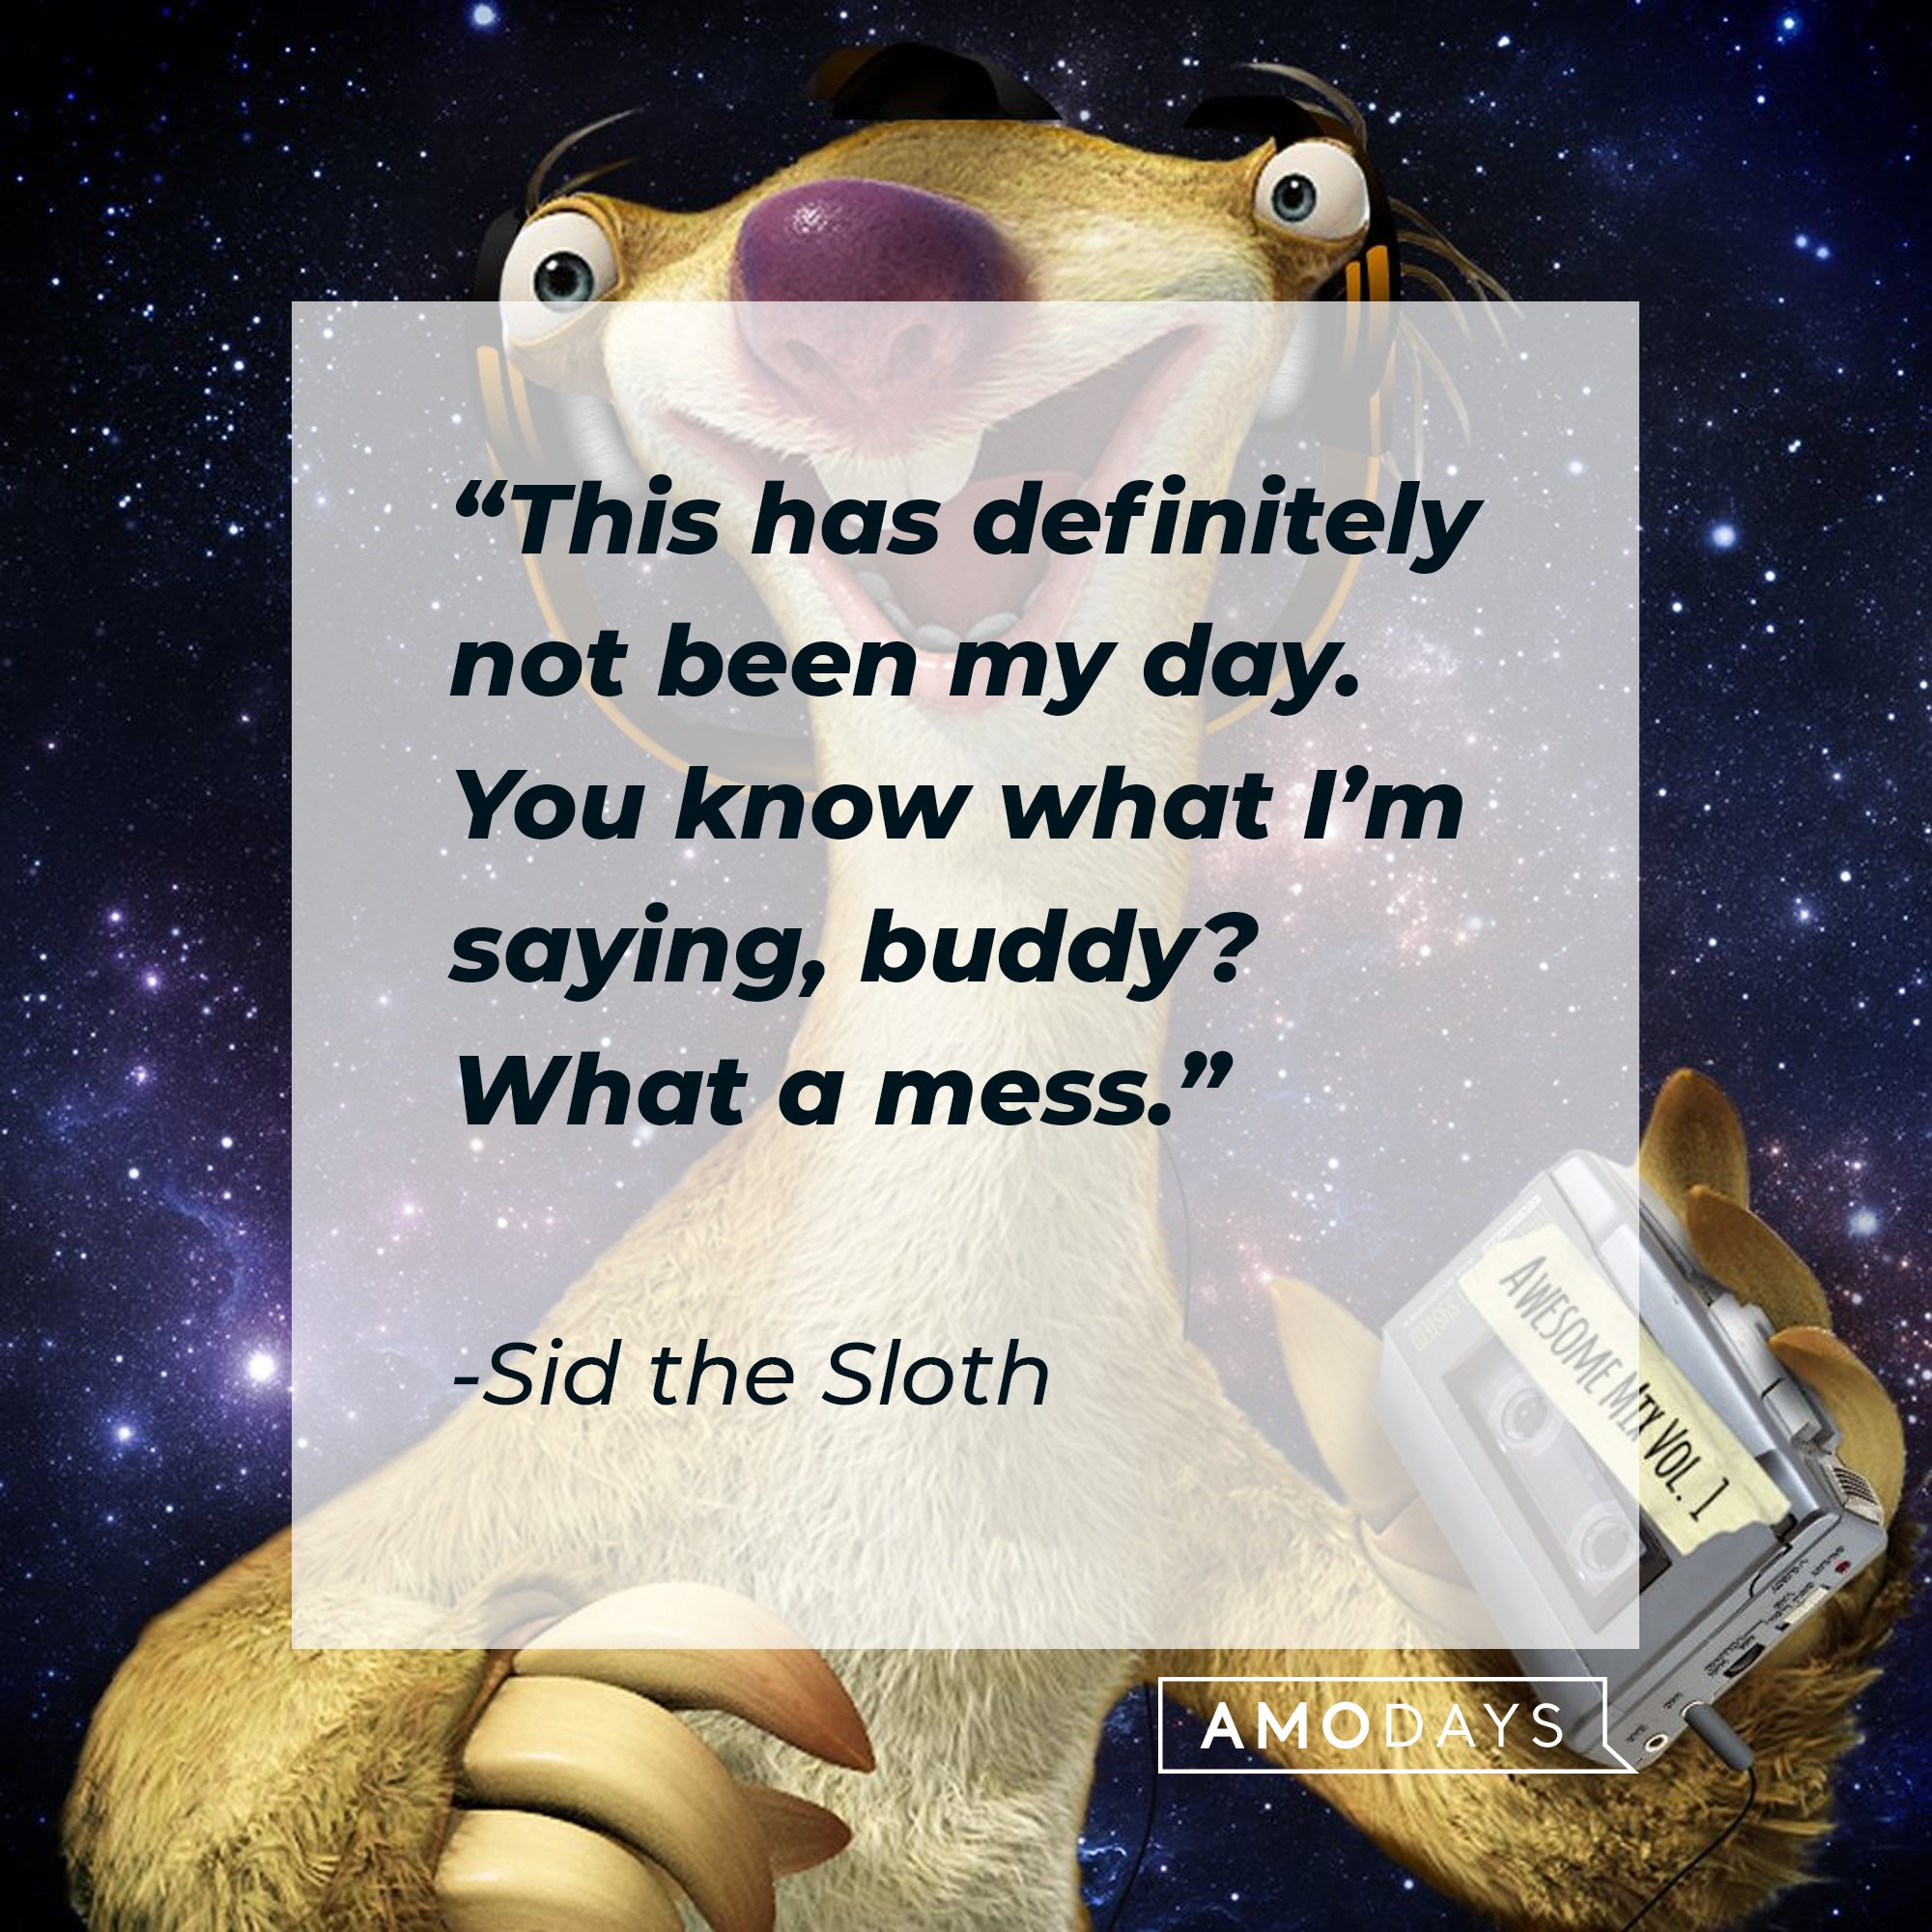 Sid the Sloth's quote: “This has definitely not been my day. You know what I’m saying, buddy? What a mess.” I Image: AmoDays